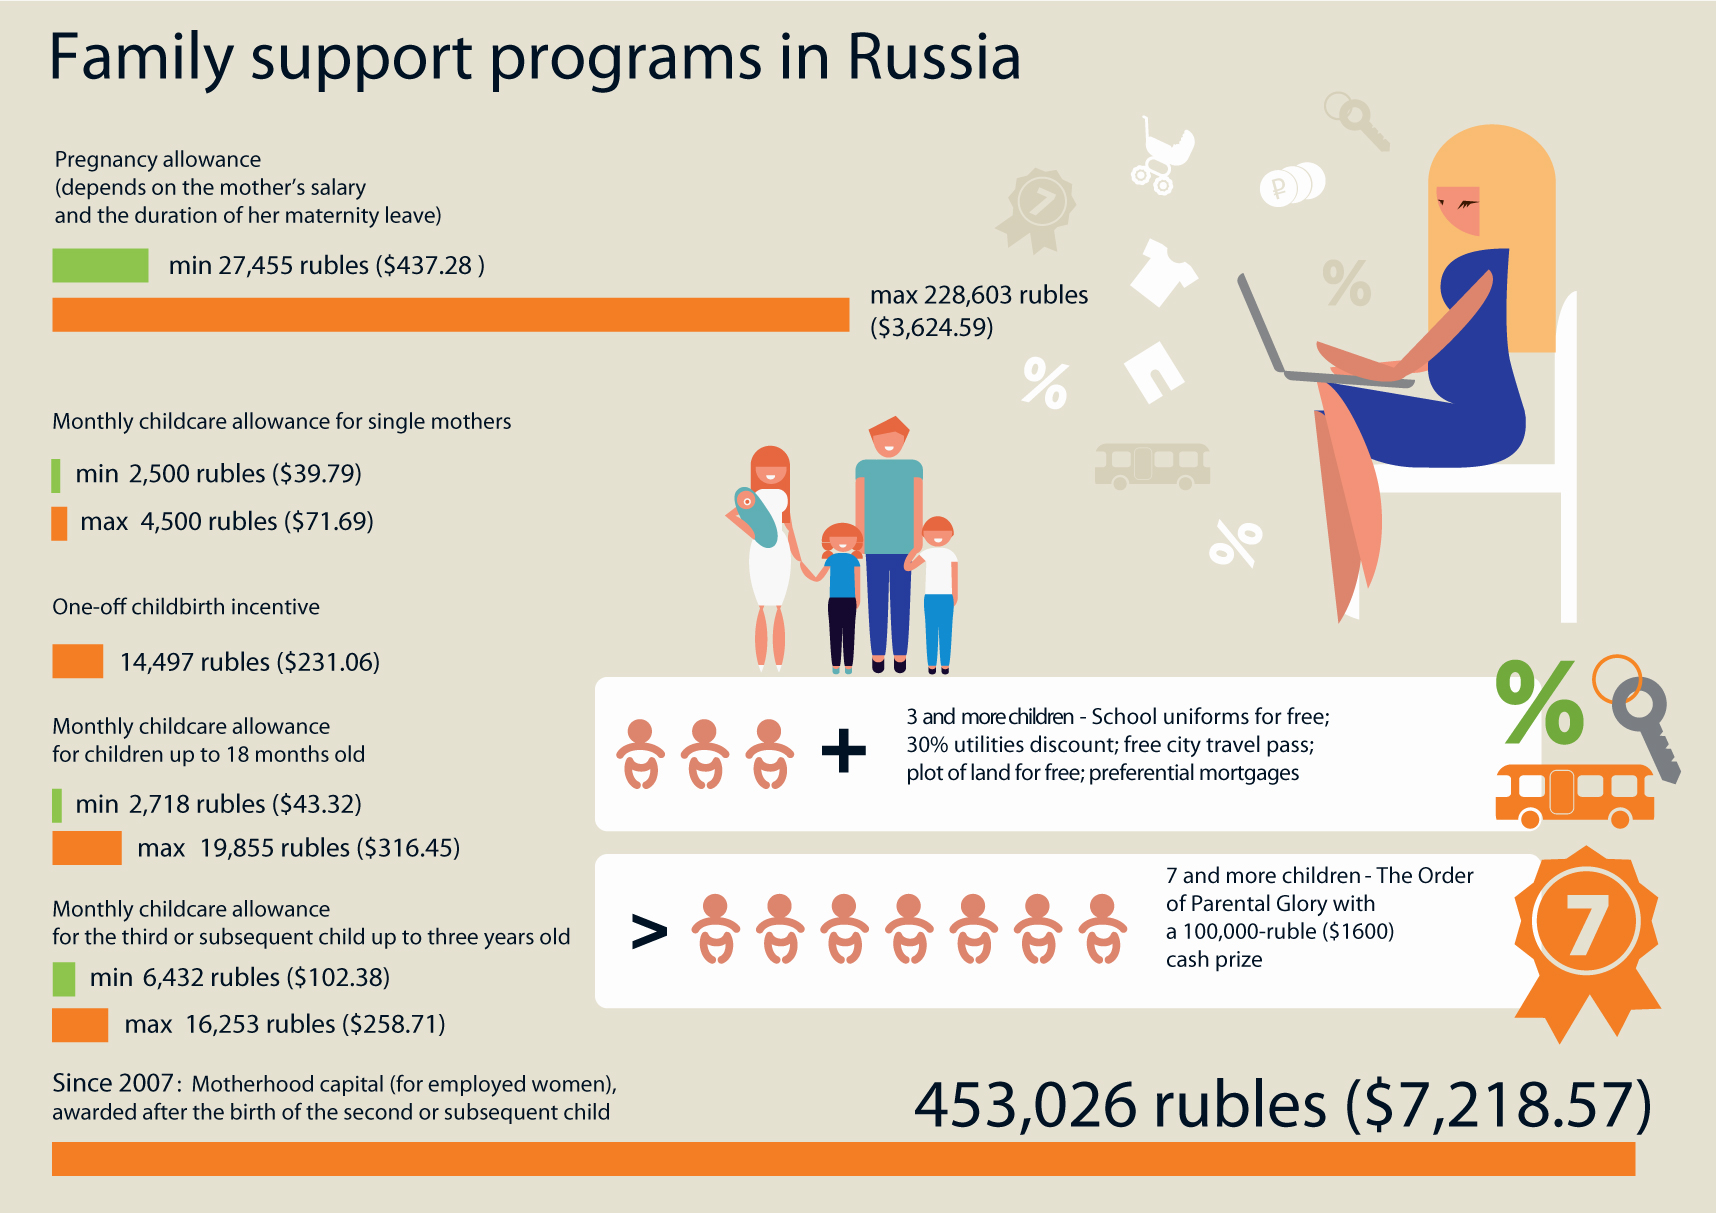 Social policy programs (including aid and social security benefits) make up the lion’s share of Russia’s budget expenditures. For instance, in 2014, about 31 percent of the spending from both federal and regional budgets (11.9 percent of the country’s GDP) went on social policy – excluding healthcare, education, sports and culture programs, which are considered separate budget items.Social security still represents the bulk of social policy expenditures — in 2014, it accounted for 73 percent of the money that went toward social policy. Beyond that, the costs of family and child support programs have been on the rise since 2010, although this area remains comparatively small, never exceeding 5 percent of total expenditures. That said, of all areas of spending, family and child support programs include the highest number of allowances and incentives.The family support programs, designed to improve the demographic situation in the country, have already proven efficient. In 2014, the birth rate in the 66 regions that awarded families with three or more children with allowances increased by 2.4 percent.  Besides federal aid (described in the infographic), some of the regional governments have also introduced their own incentives.  For instance, in the Moscow Region, mothers that give birth to triplets receive an aid package of 150,000 rubles (around $2,400).The highest one-off payments to families adopting orphans are awarded in the Sakhalin Region in the Russian Far East. Since Jan. 1, 2014, they receive 617,000 rubles ($9,870) for each adopted child and a million rubles (around $16,000) if adopting a child with disabilities.In the Irkutsk Region, families adopting one or more children receive a one-off payment of 100,000 rubles ($1,600). In most other regions, the authorities stick to the sums stipulated by federal law – 13,741 rubles ($219) for adopting a child, and 105,000 rubles ($1,680) for adopting a child with disabilities.The most substantial one-off incentive, a payment issued to women on the birth of their second and subsequent children, was introduced in 2007. Named the “motherhood capital," its rate is changed annually to adjust for inflation. However, there are several restrictions in place to prevent the abuse of the funds. Namely, the incentive is not provided in cash, but rather as a certificate that can only be used for specific purposes, such as the improvement of living conditions of the family (including a partial repayment of the mortgage, or repairing and expanding one’s house), the education of the child or social security benefits for the mother.  Read more: The contemporary Russian family: Traditional in word, slippery in deed>>>